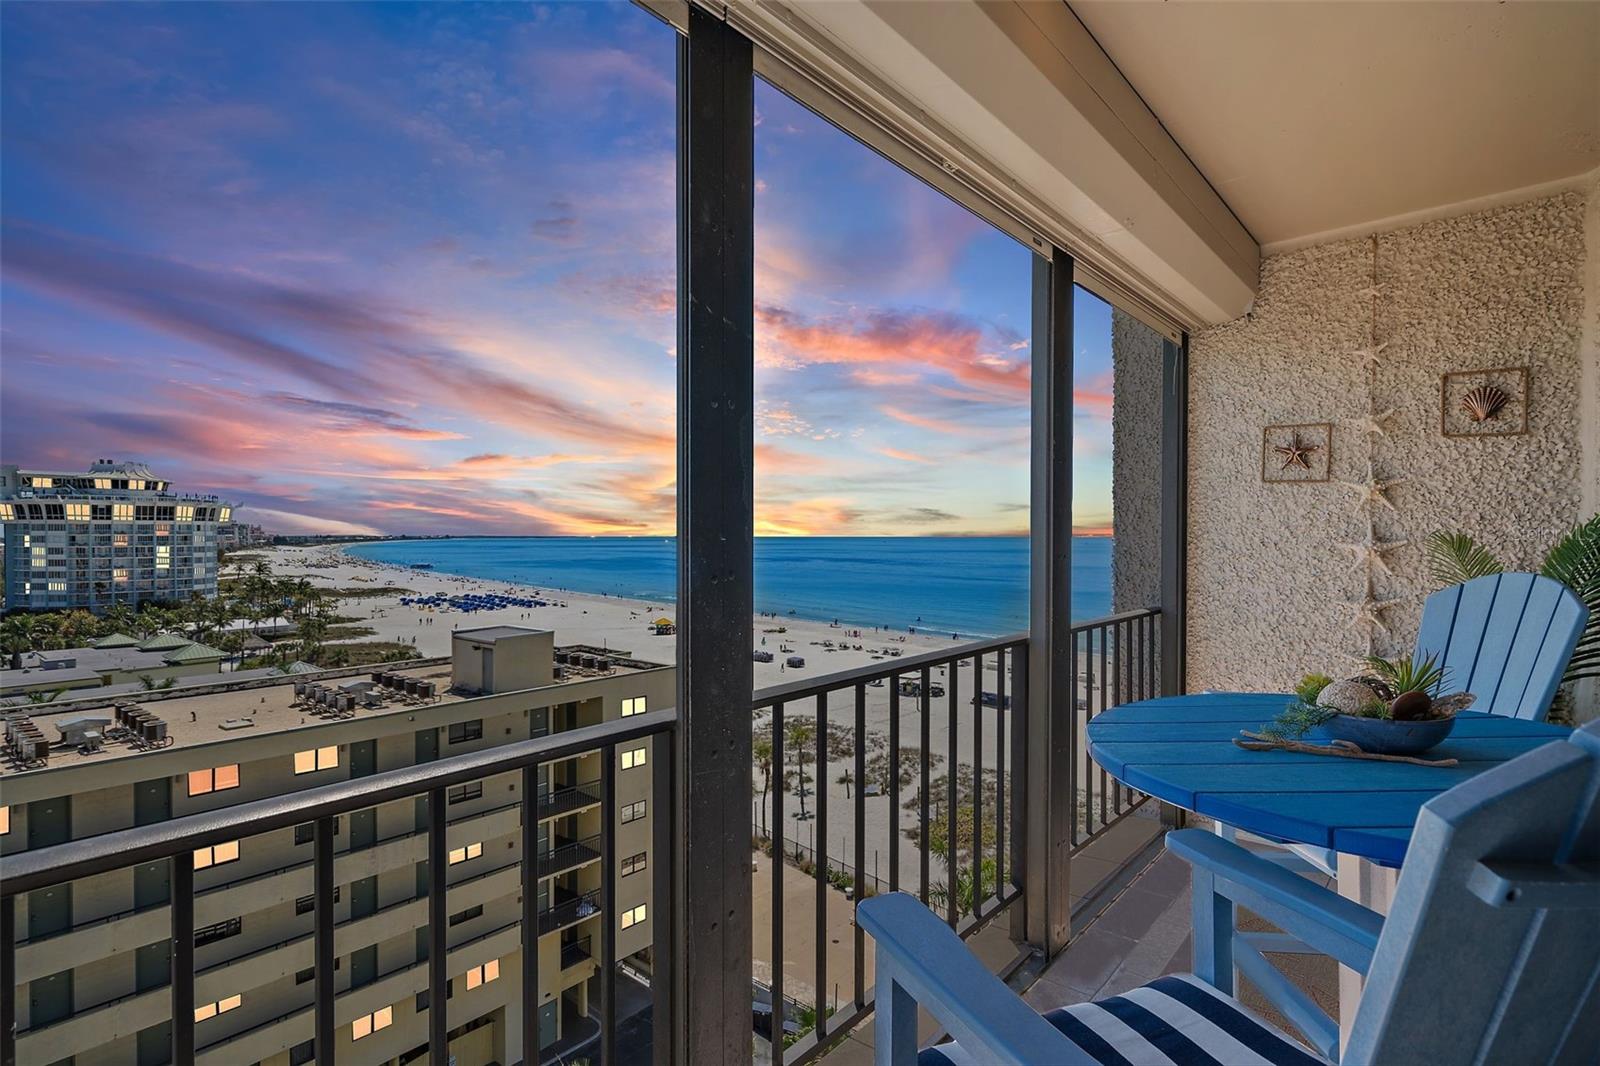 Unit 910 is one of only six 3-bedroom units in the building. It enjoys phenomenal views via 'miles of windows.' Looking south you can see The Don CeSar and beyond to Egmont Key!